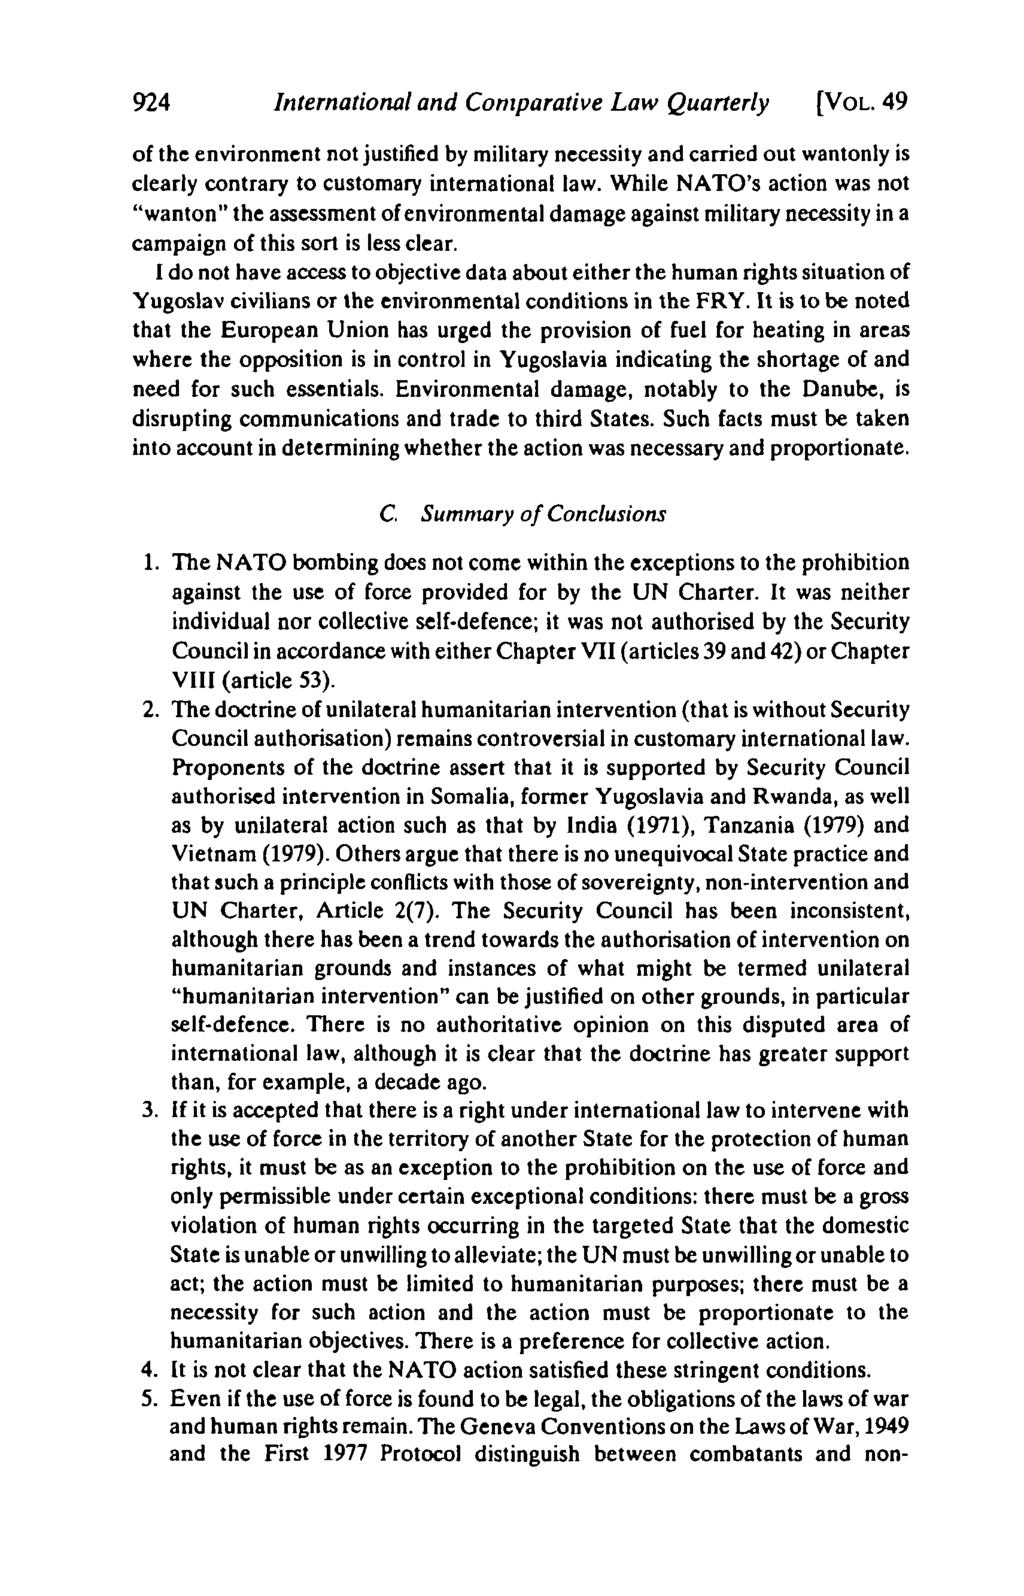 924 International and Comparative Law Quarterly [VOL. 49 of the environment not justified by military necessity and carried out wantonly is clearly contrary to customary international law.